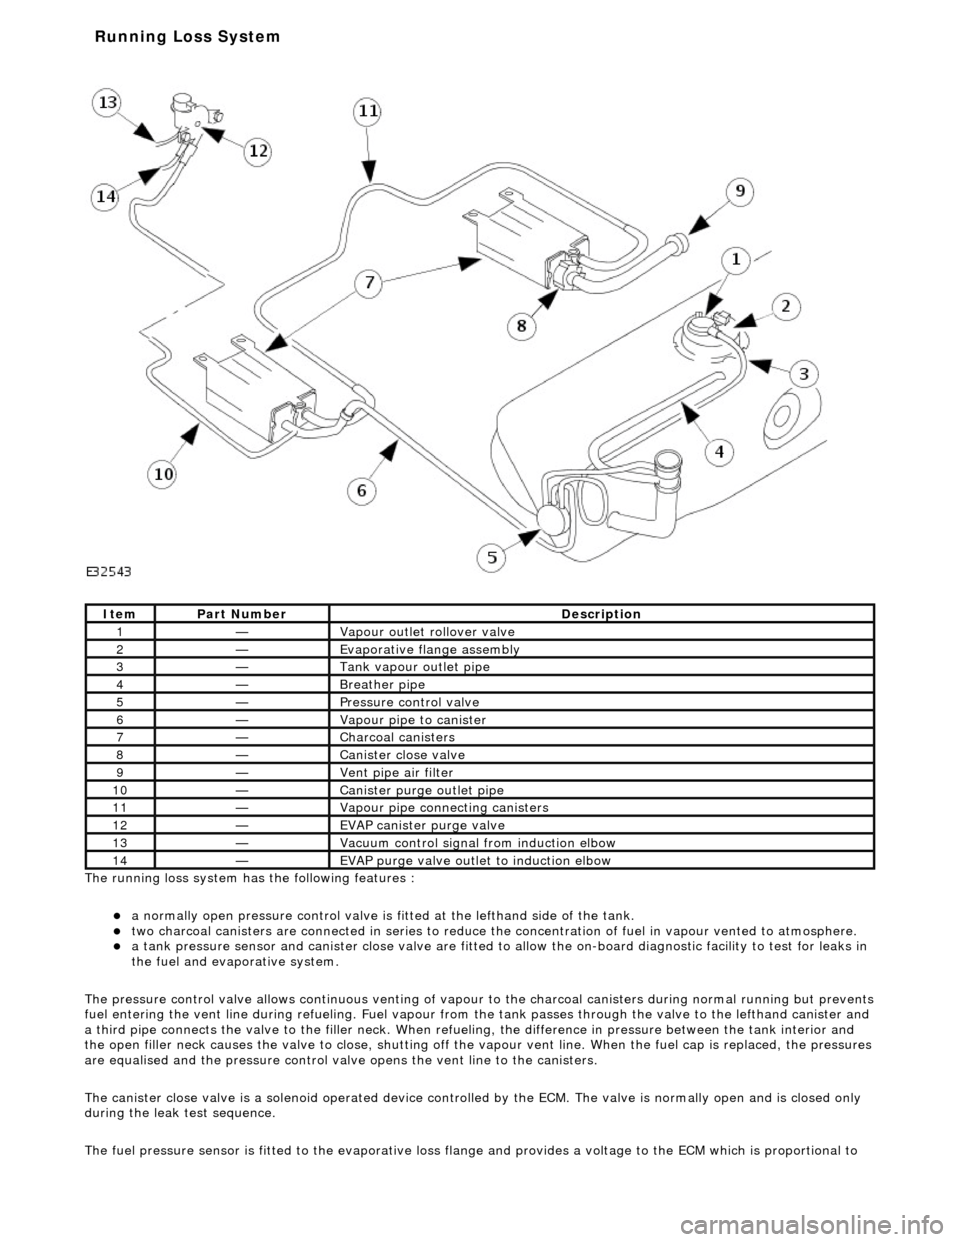 JAGUAR X308 1998 2.G Workshop Manual  
The ru nning loss
  system has the following features : 
a 
normall
 y open pressure control valve is fi
tted at the lefthand side of the tank.  
two charcoal
  canisters are connected in seri